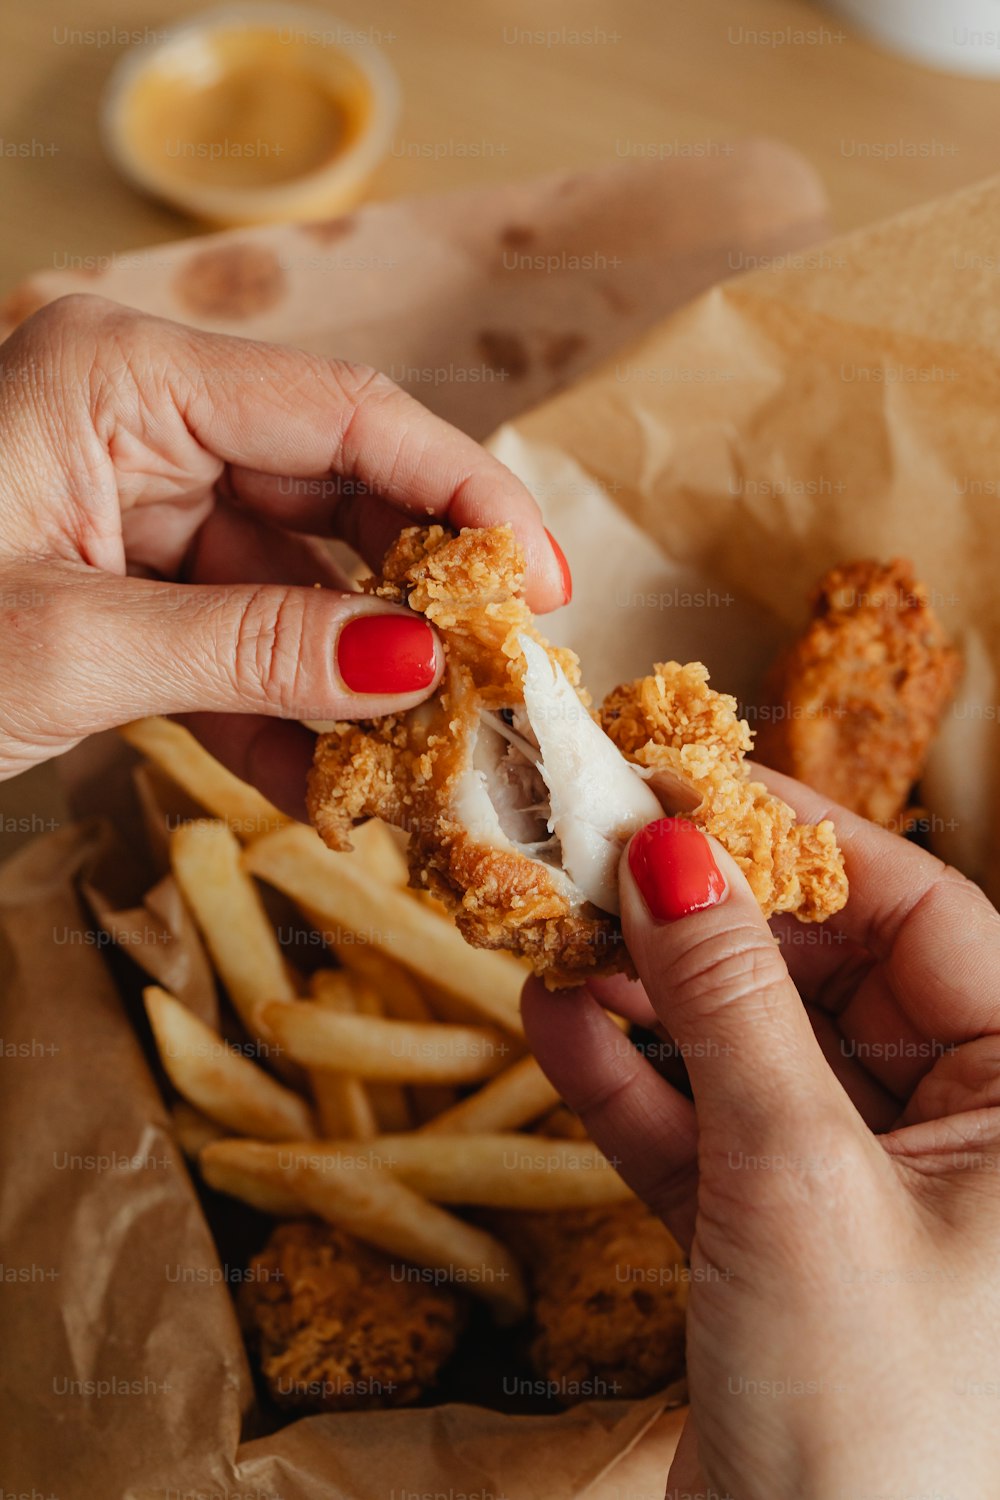 a woman is holding a fried chicken sandwich and french fries